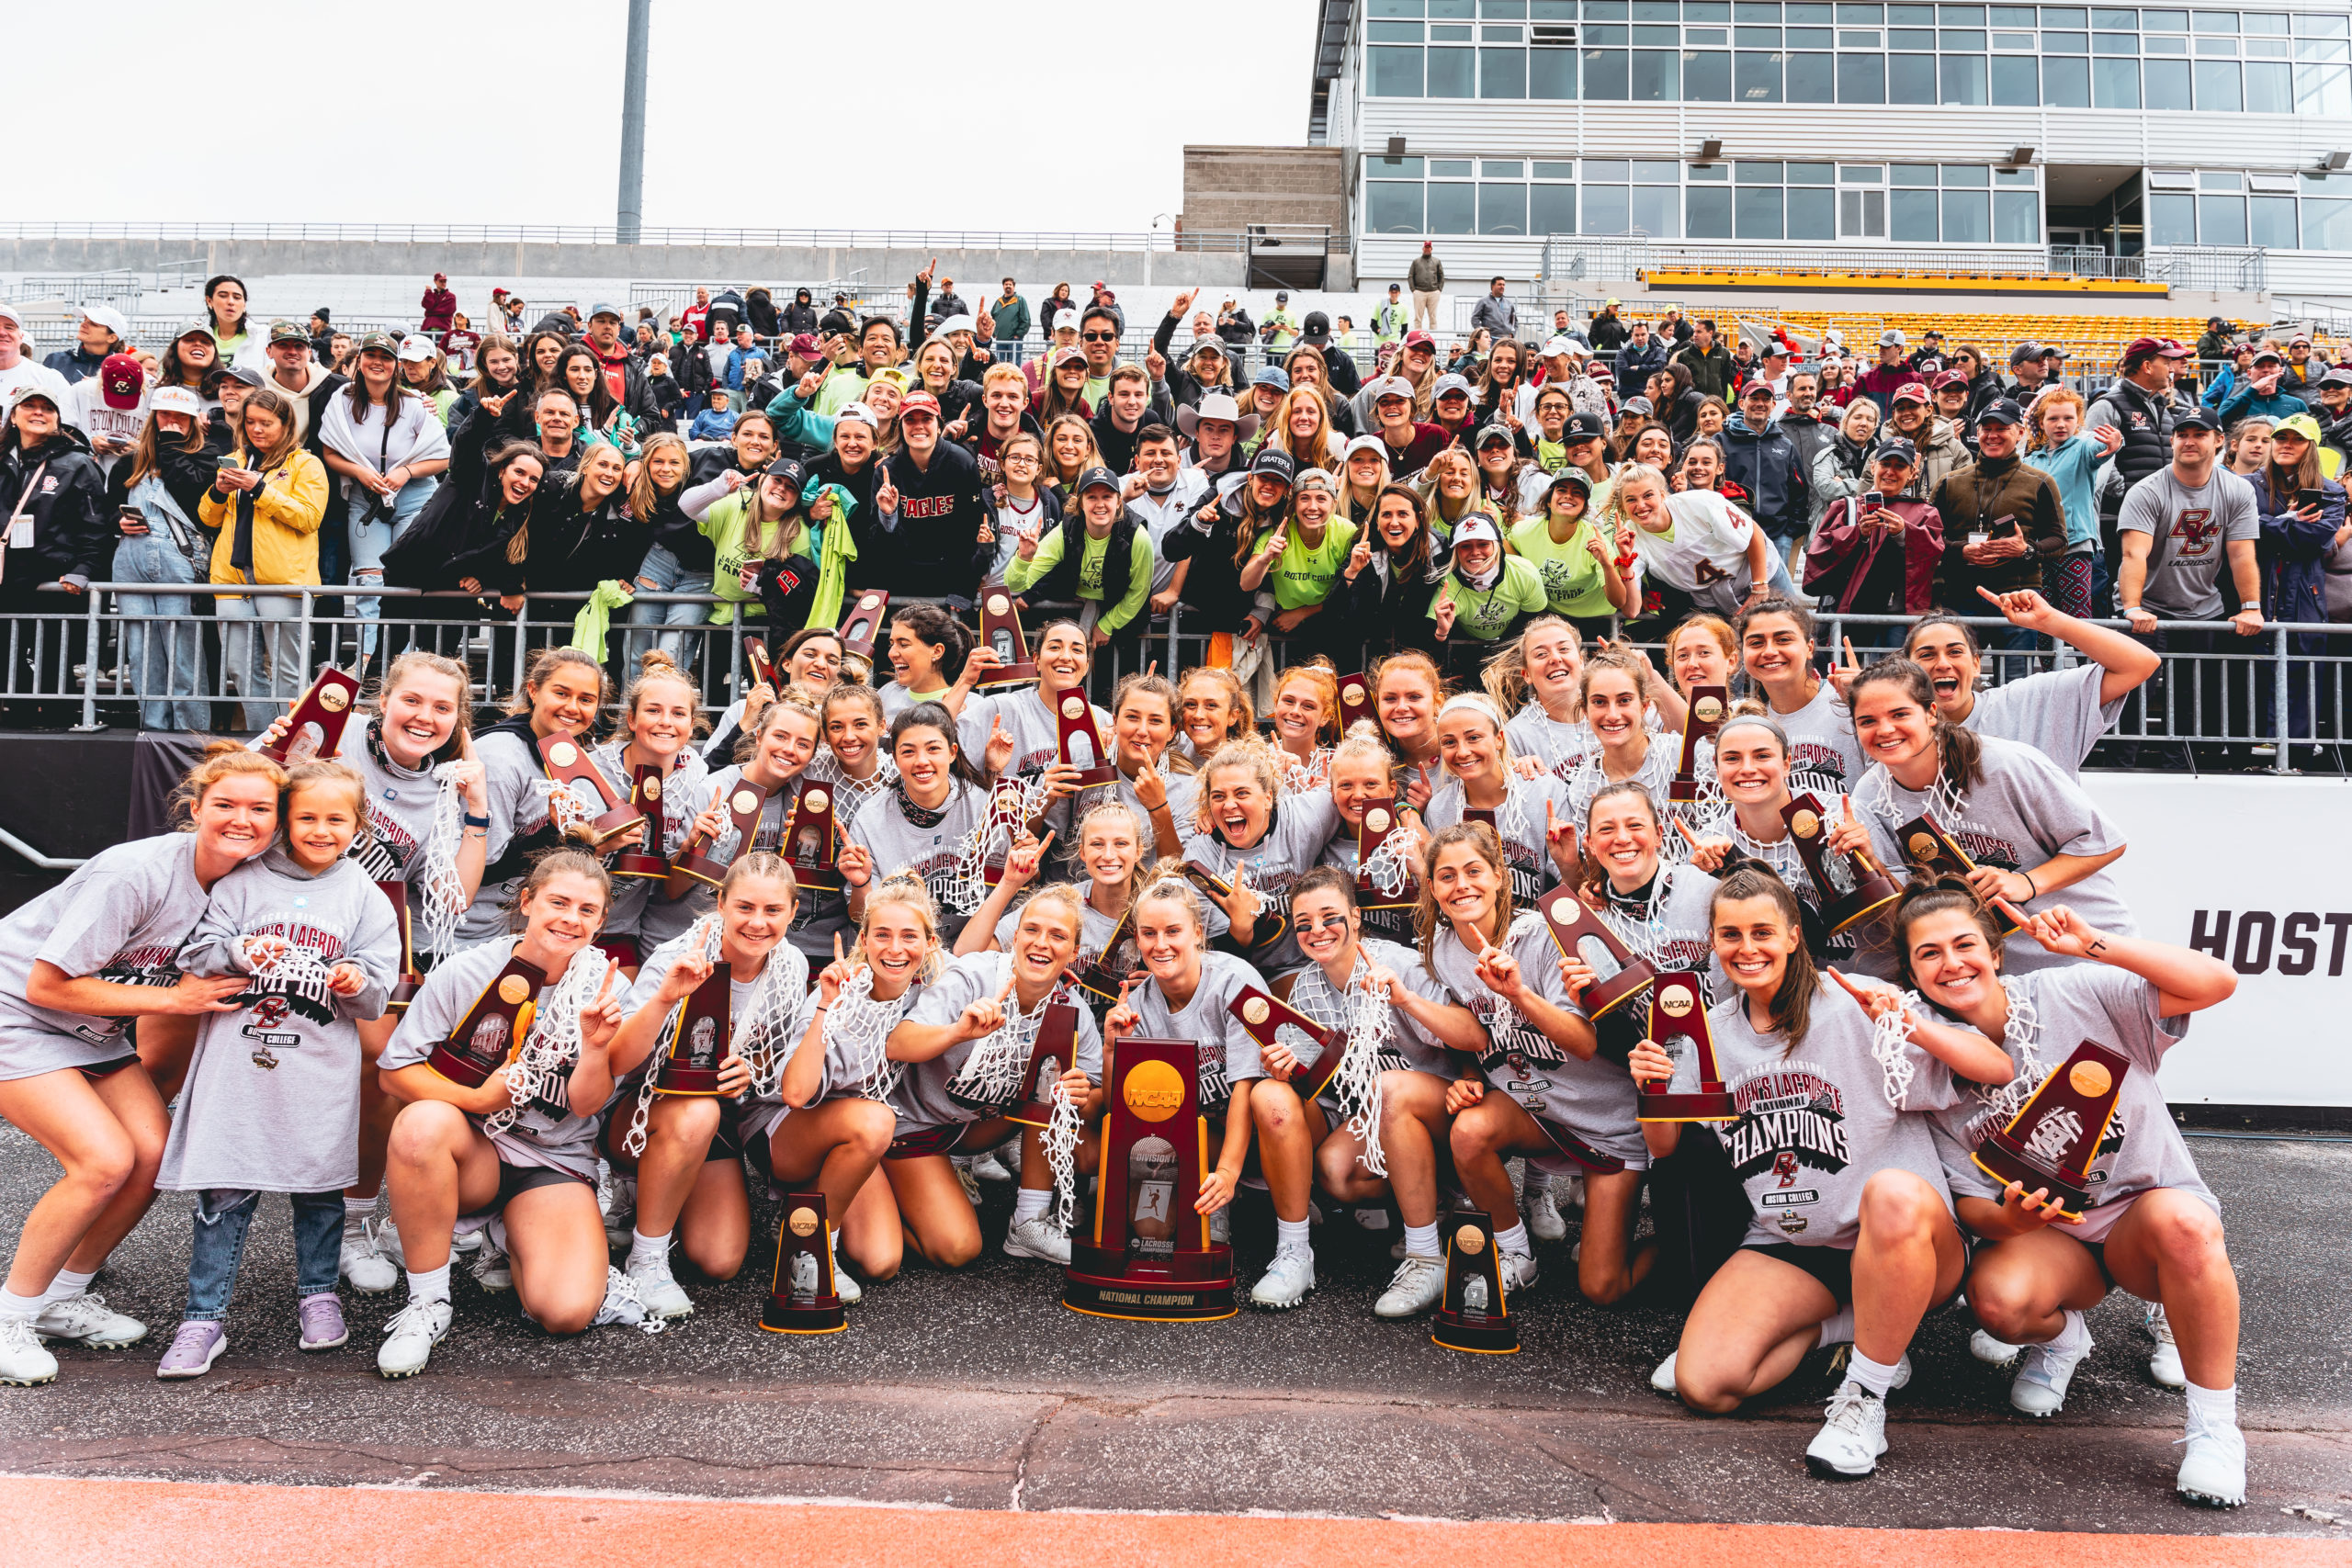 The Boston College women's lacrosse team won the National Championship this past Sunday.